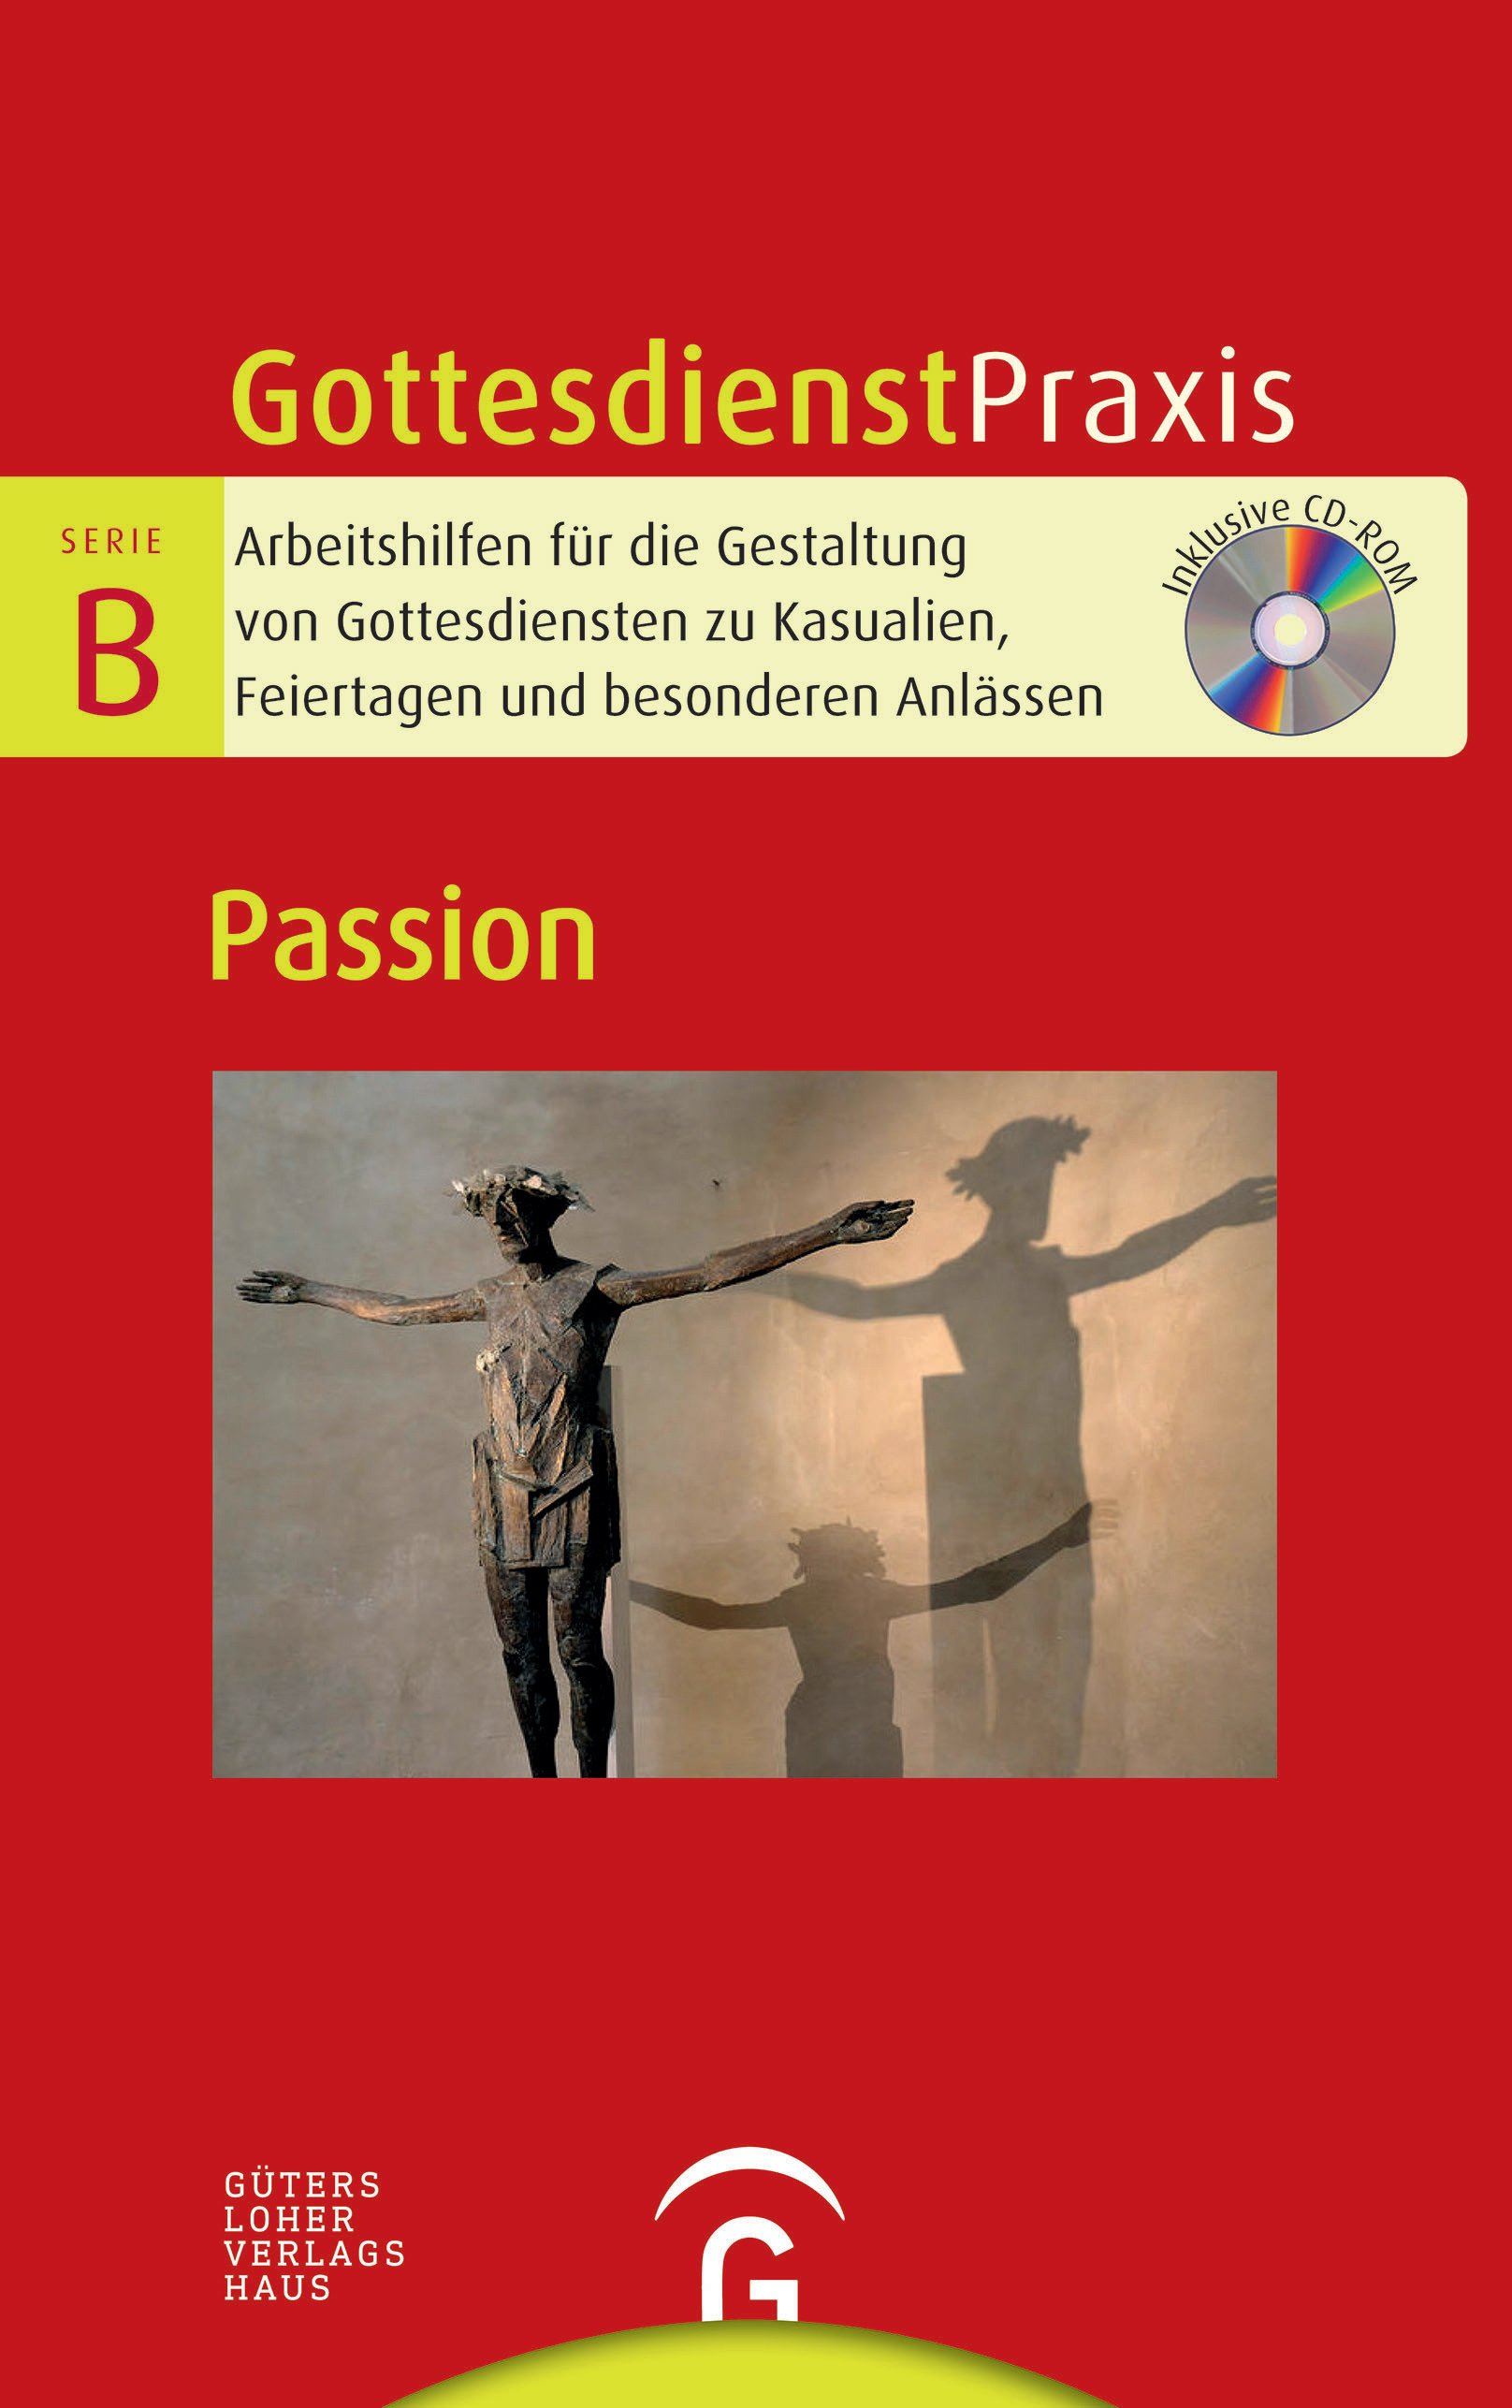 Gottesdienstpraxis Serie B Passion - Cover